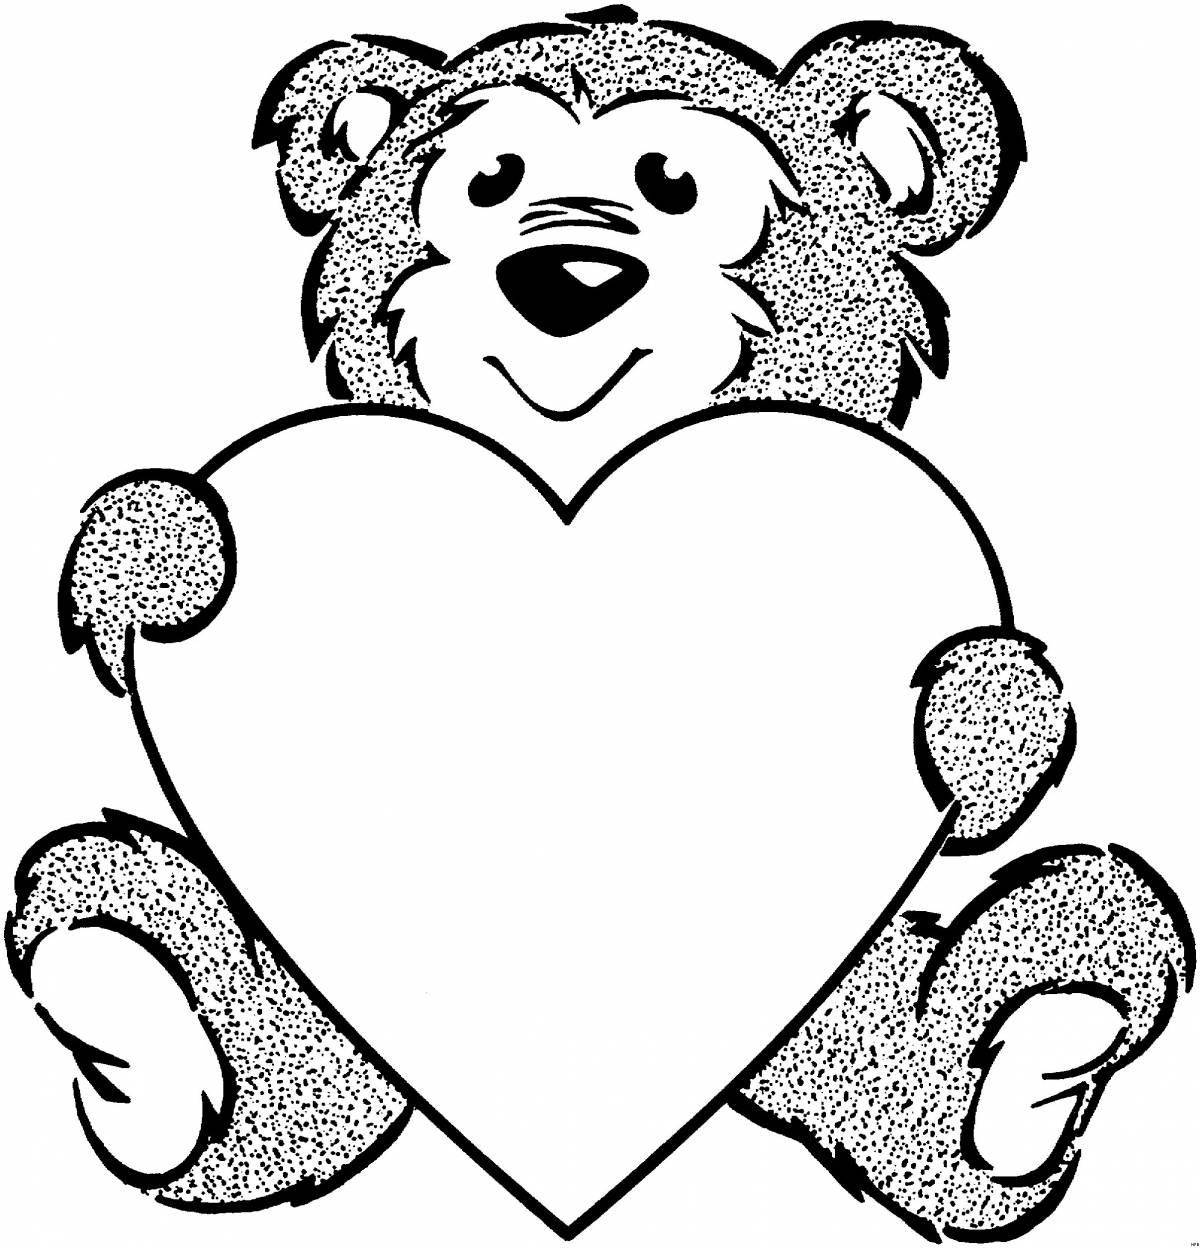 Cheerful heart coloring for children 5-6 years old